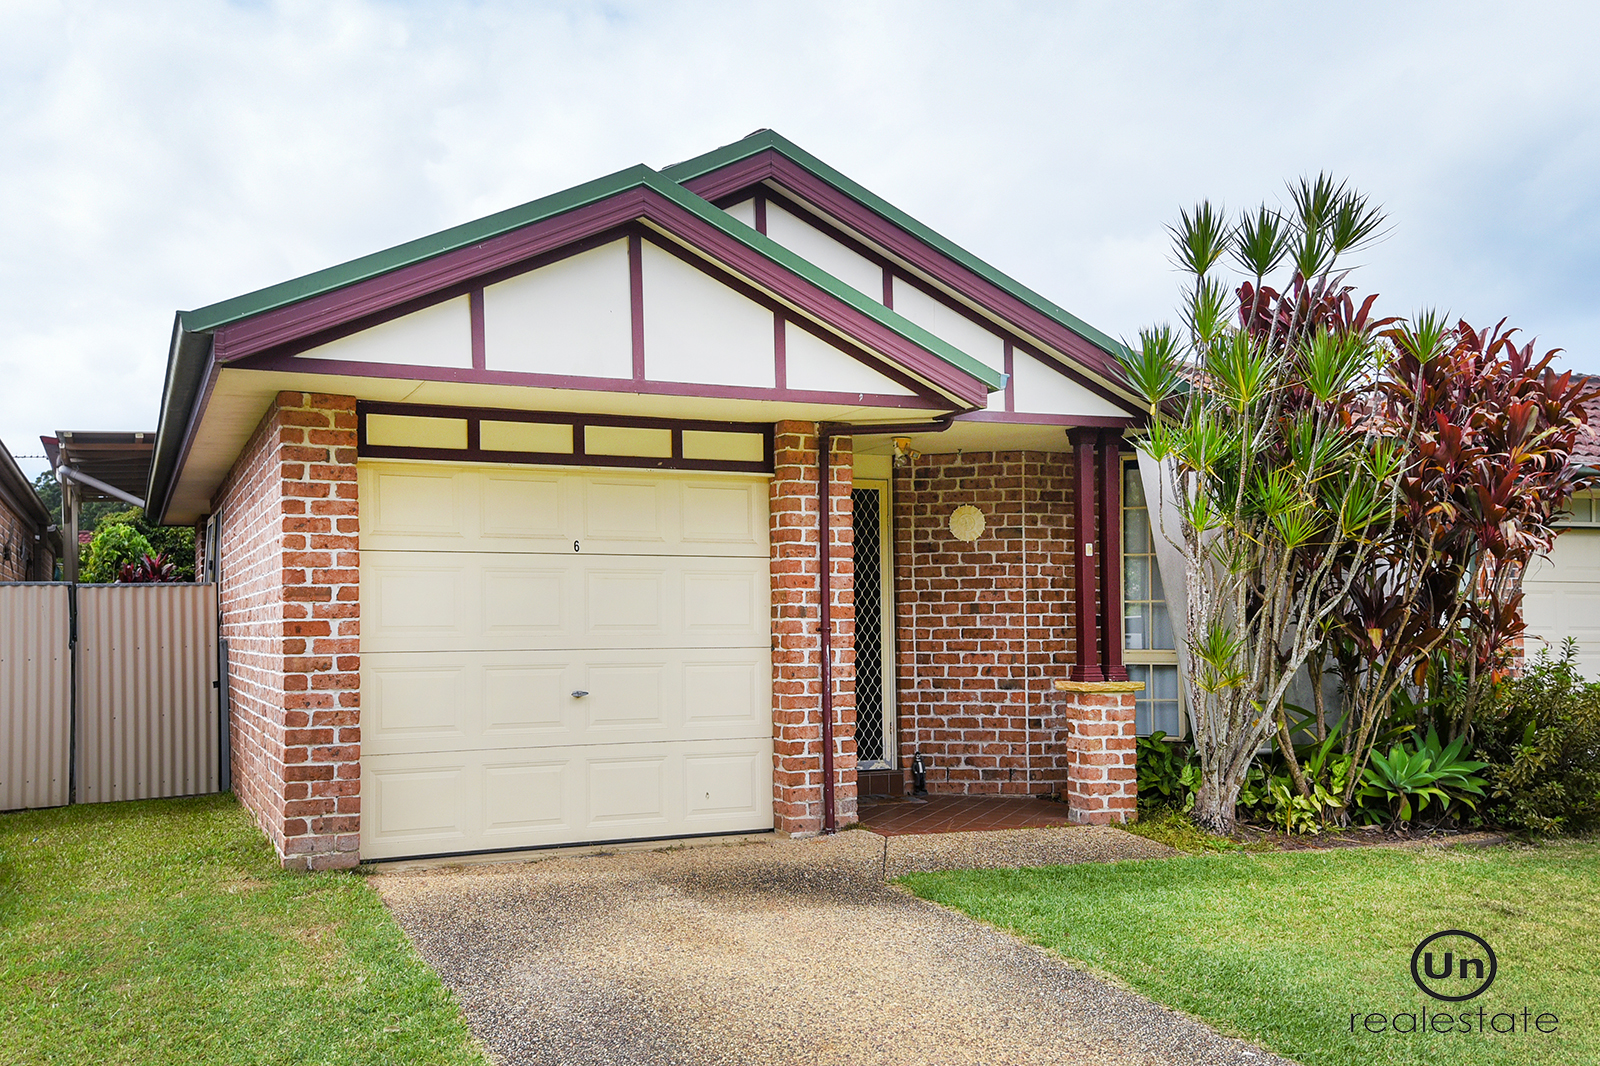 6 Noreena Place, Boambee East - Front of house